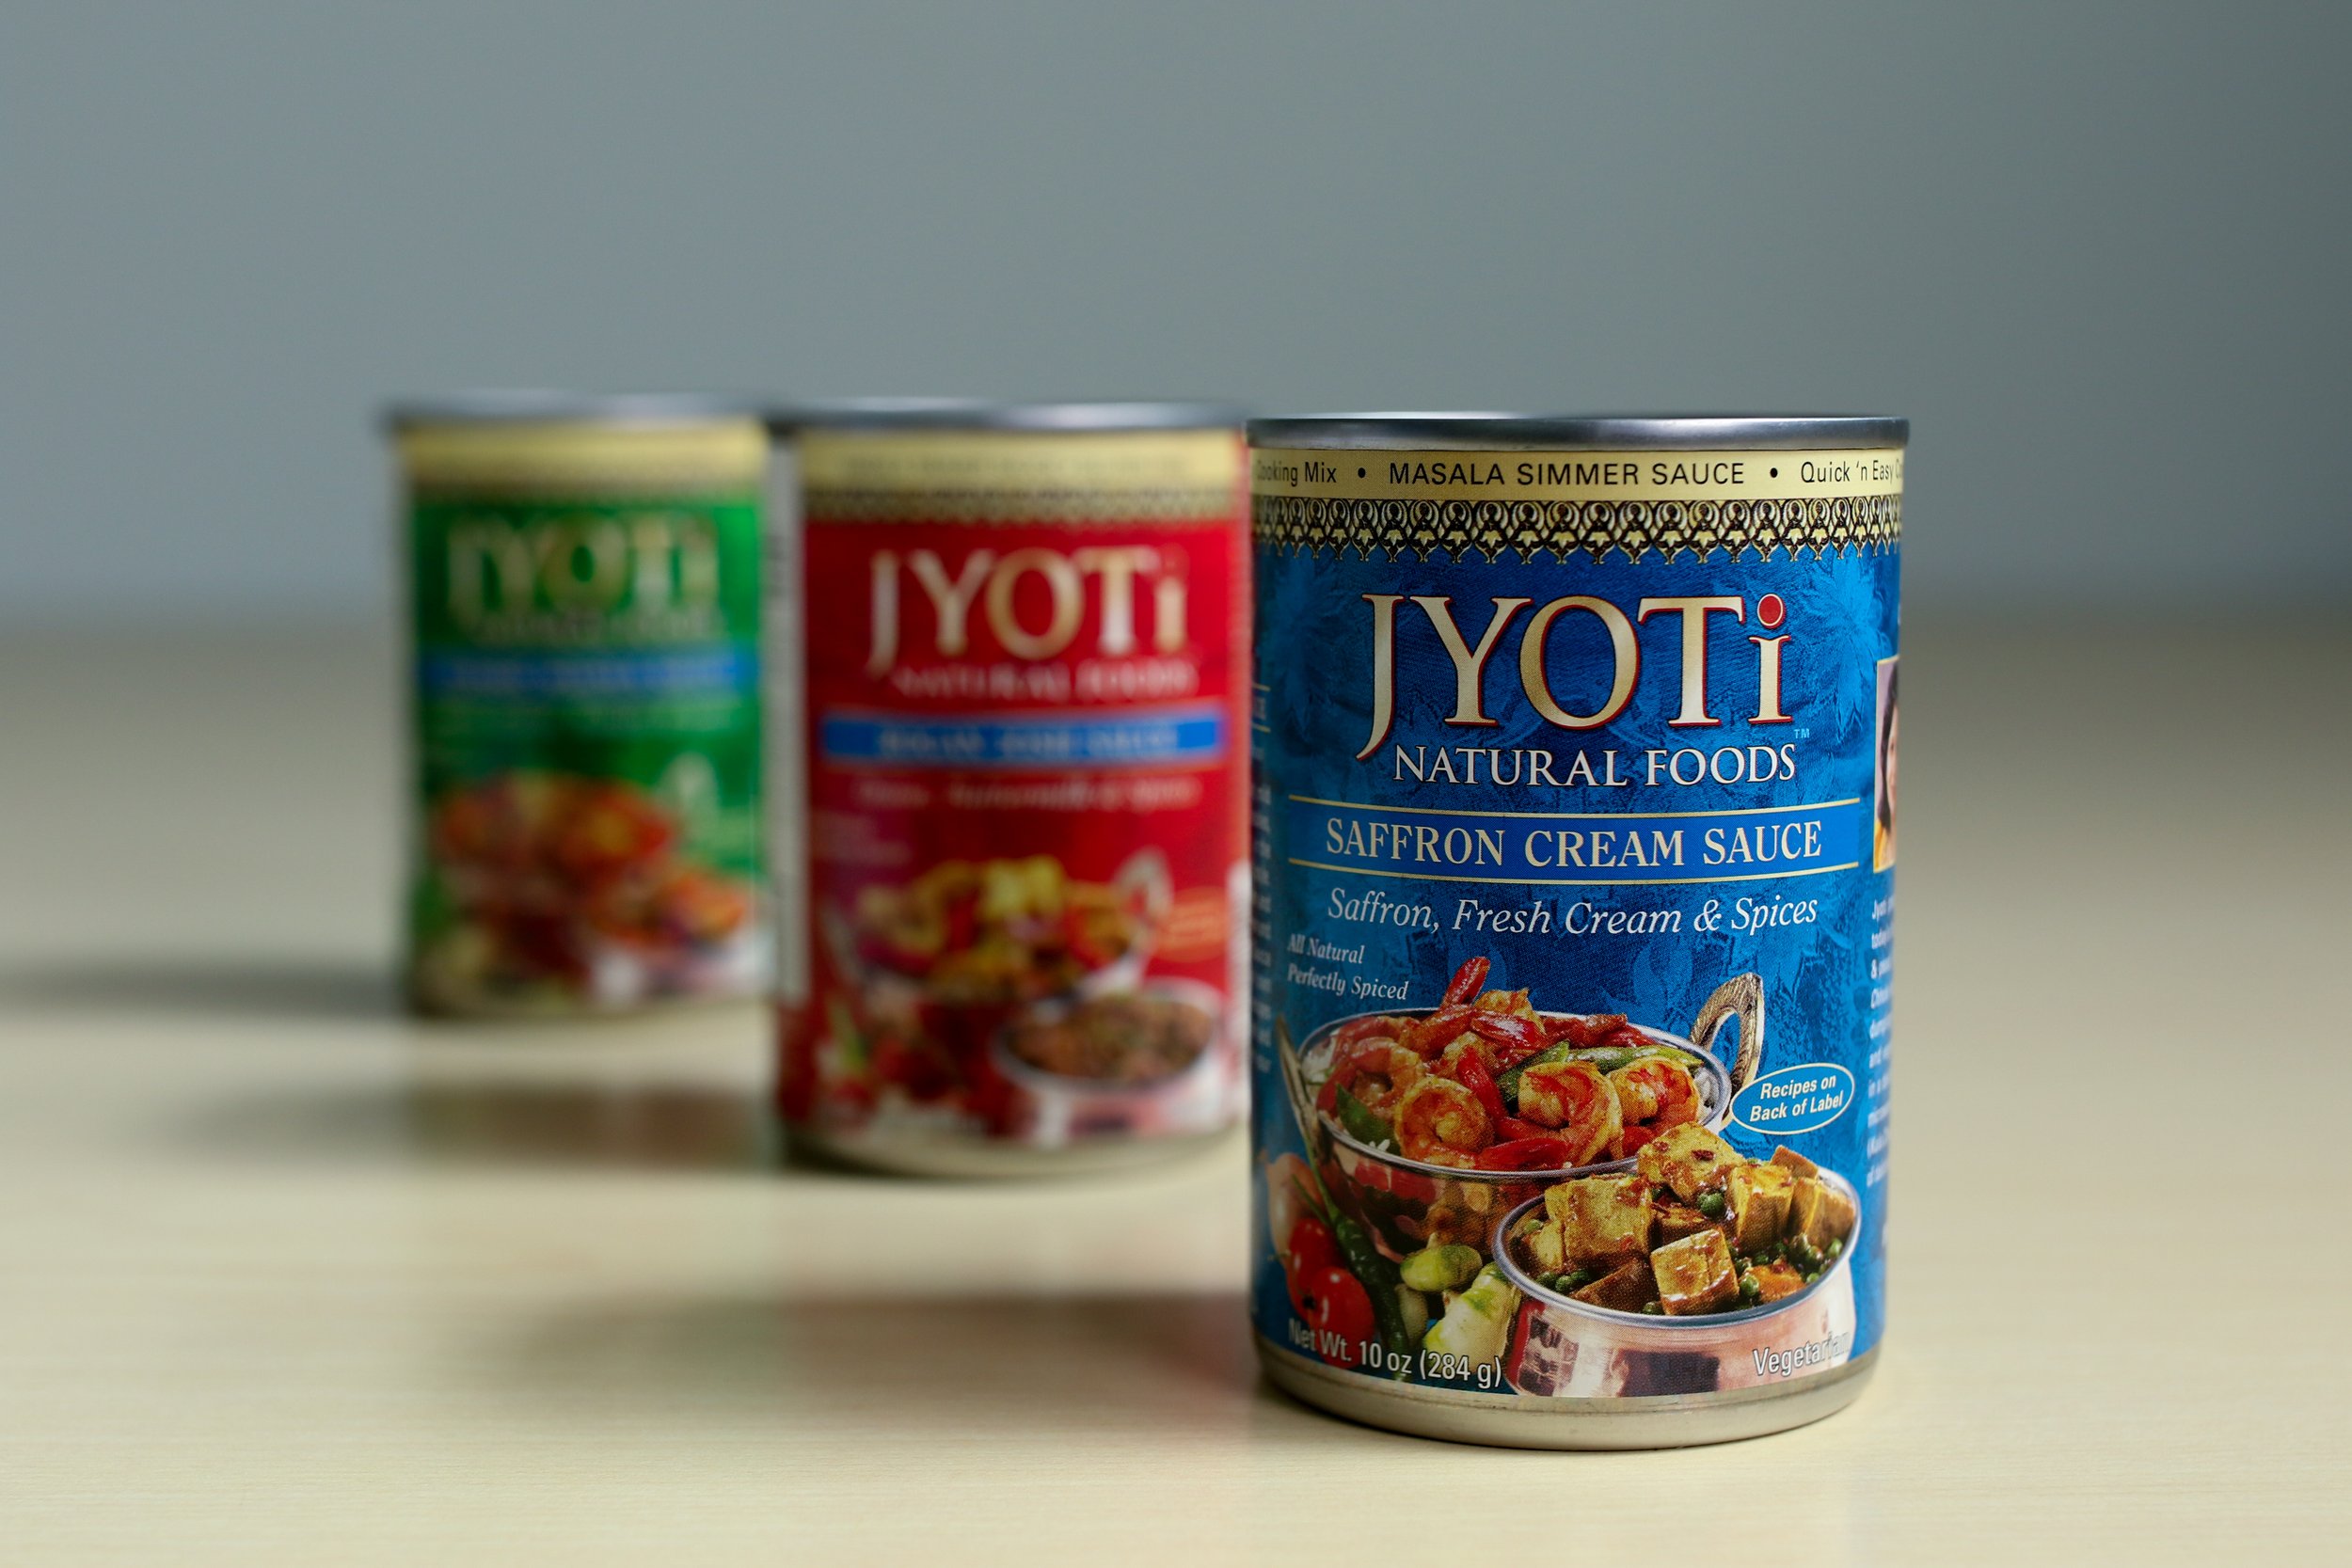 Alt text: a blue, red, and green can of indian sauce sit in a diagonal row. The blue can at the front reads “jyoti natural foods saffron cream sauce”